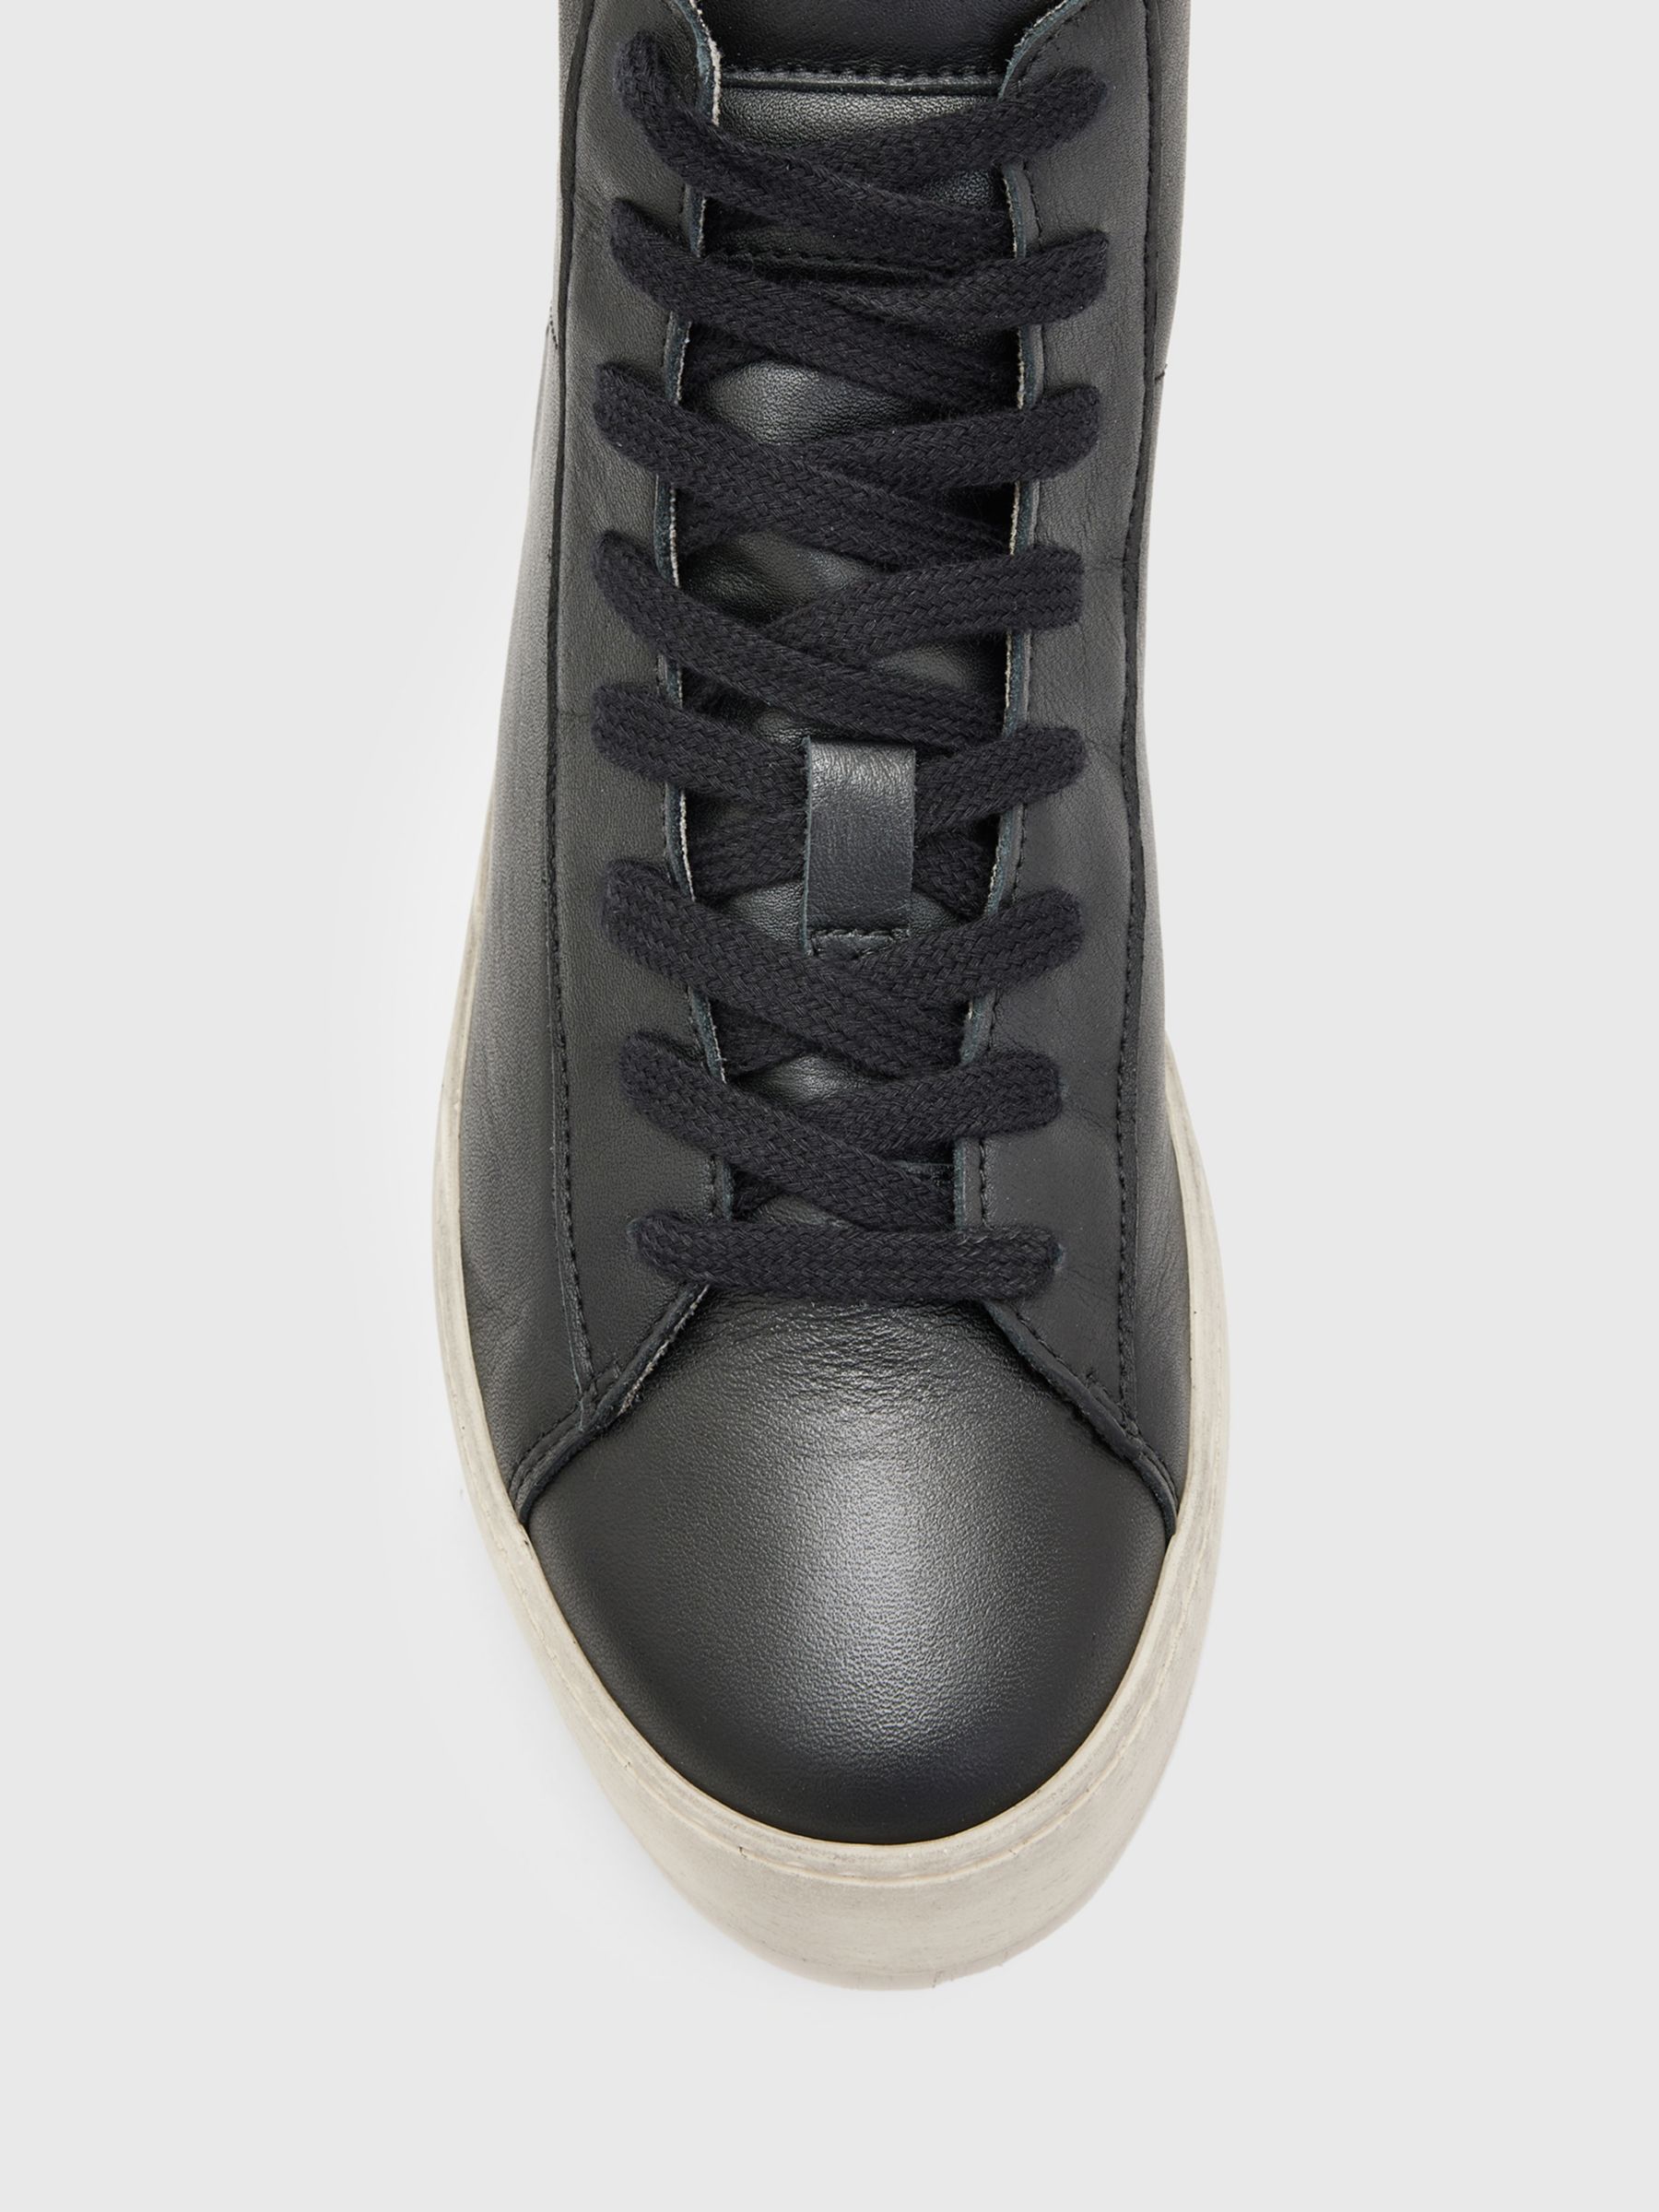 Buy AllSaints Tana Leather Hi-Top Trainers Online at johnlewis.com